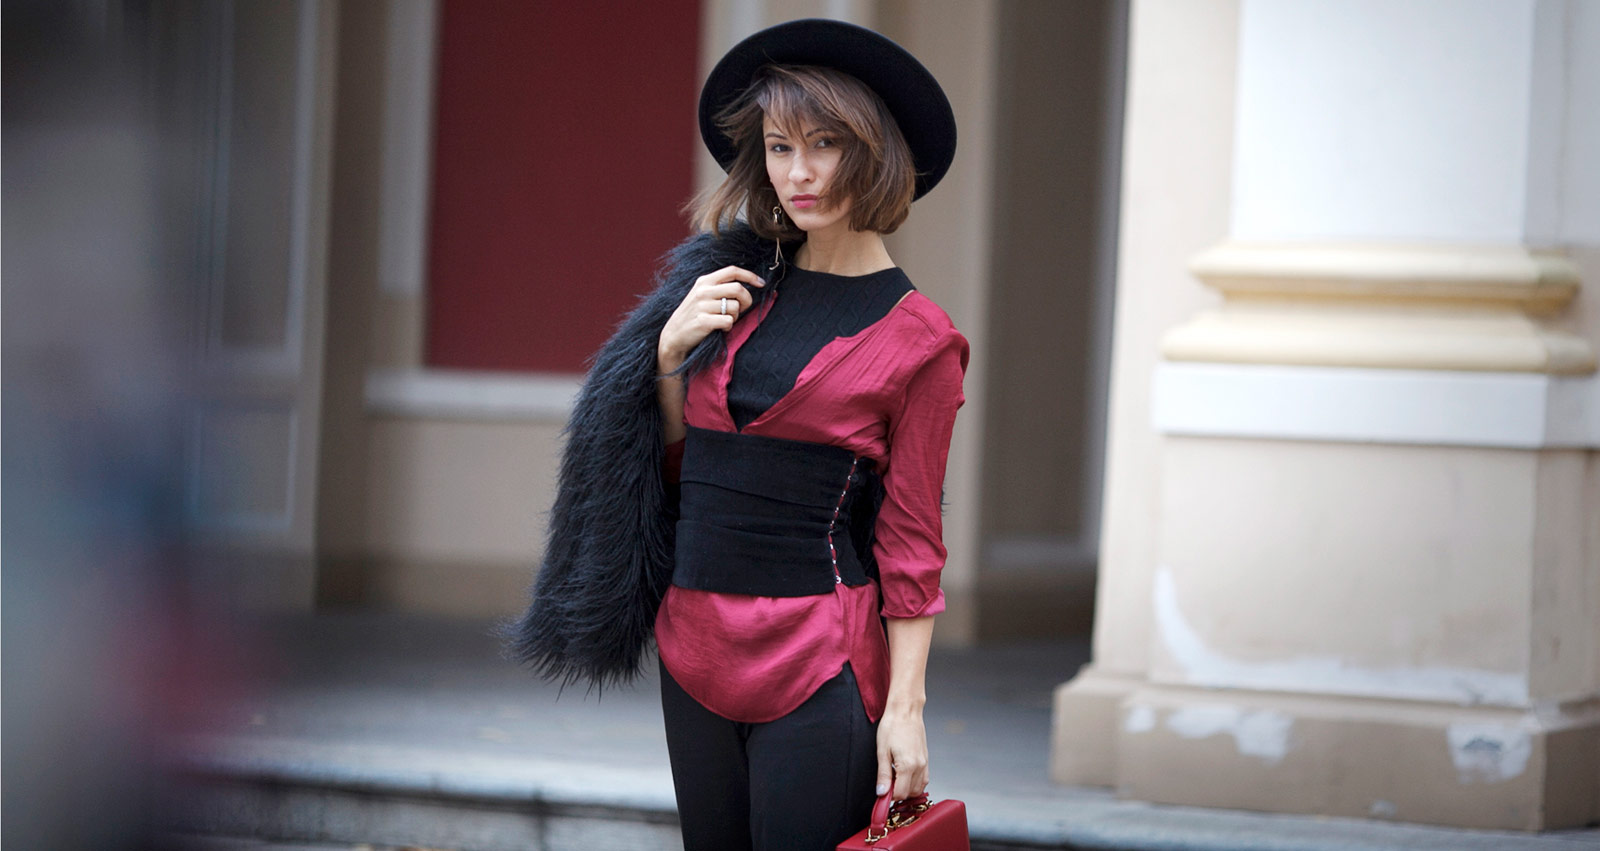 fashion trends - corset street style outfit